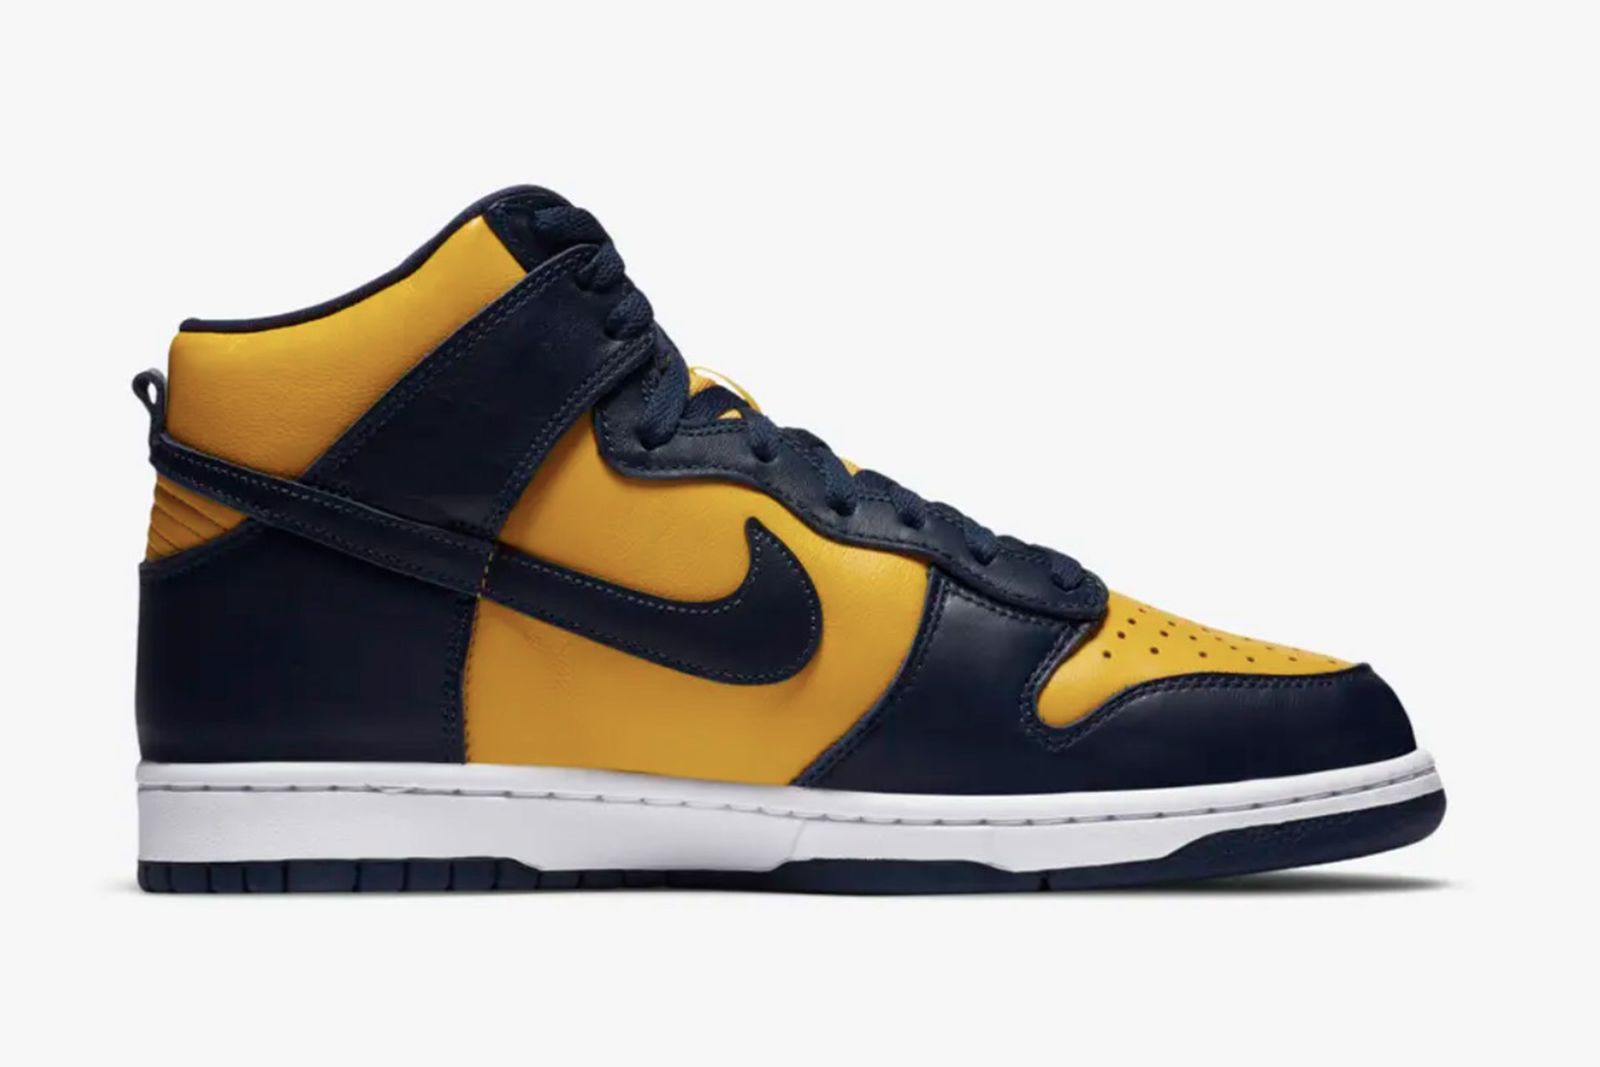 Nike Dunk High “Michigan”: Official Images & Where to Buy Today